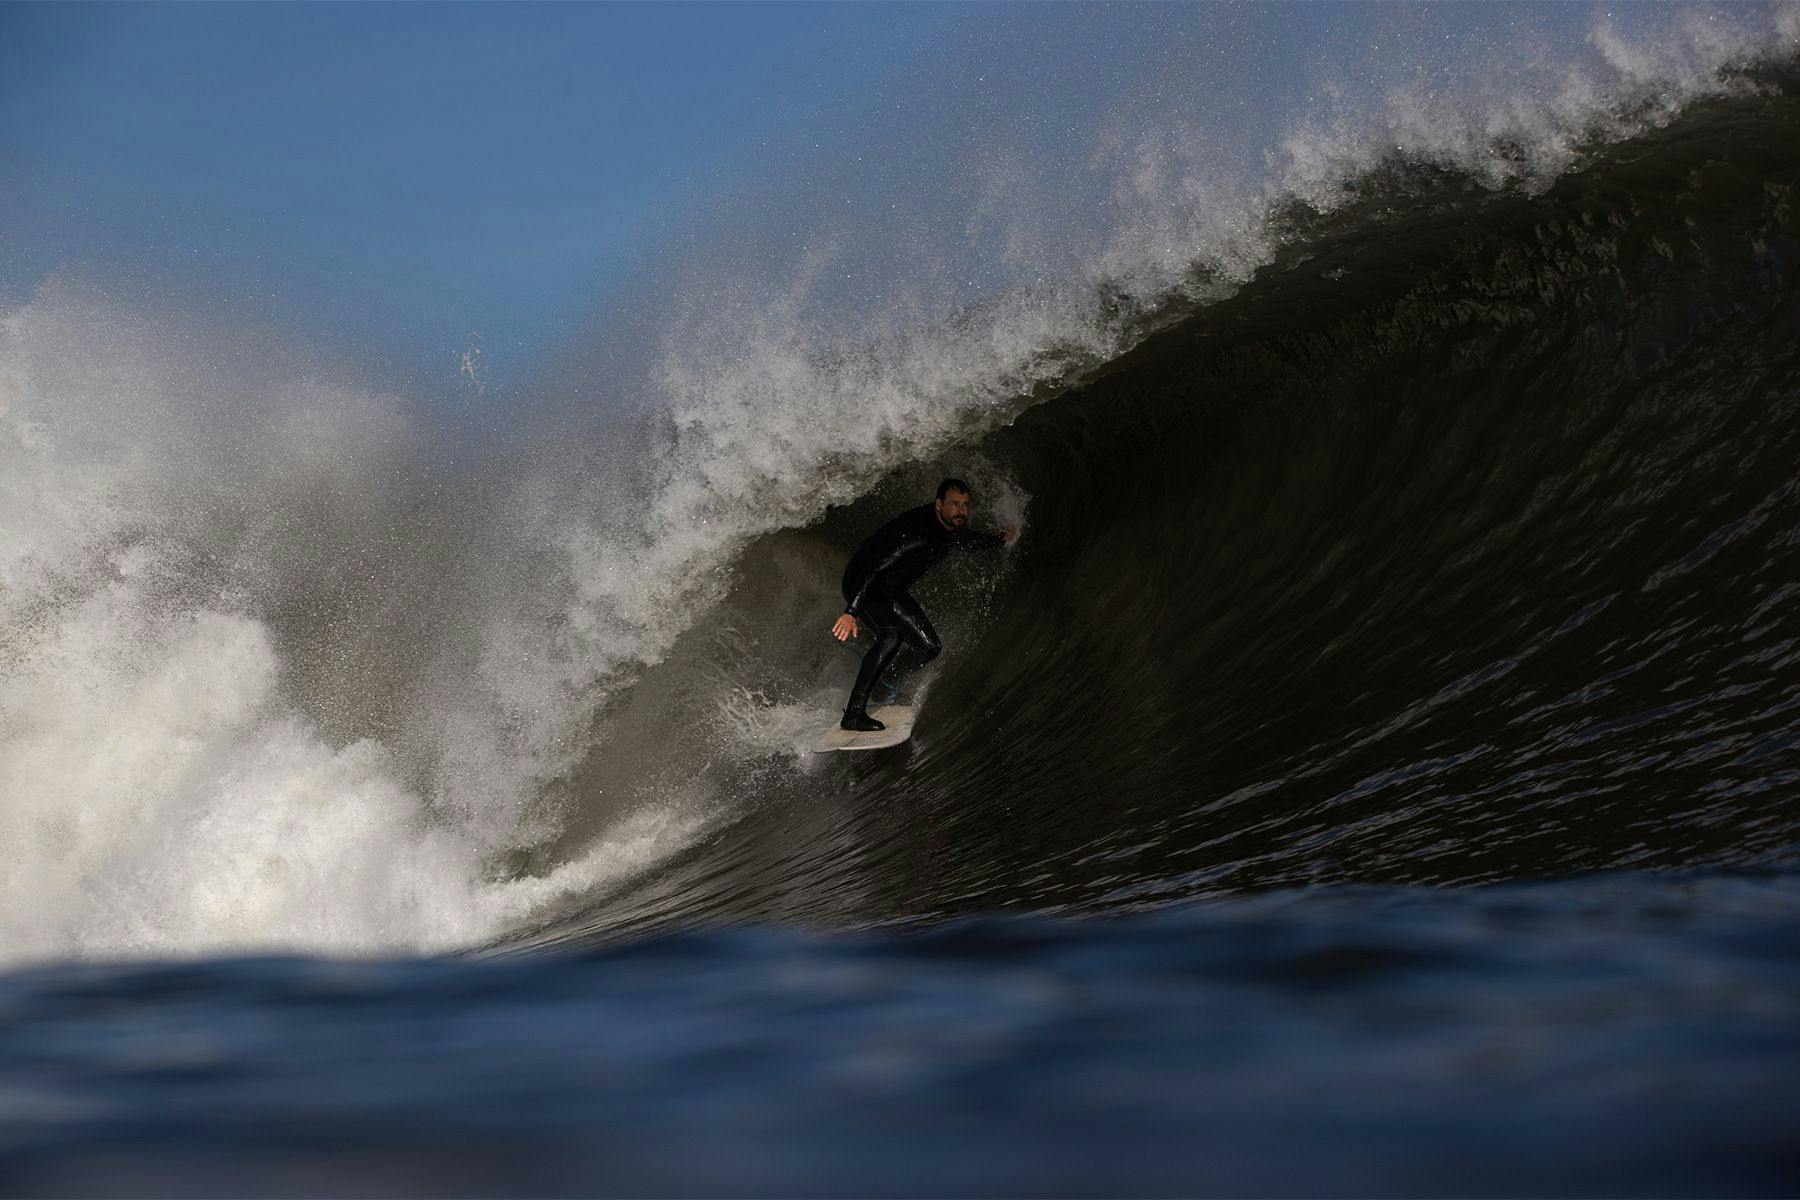 surfer gabe davies getting barreled in the northsea wearing a yulex natural rubber wetsuit